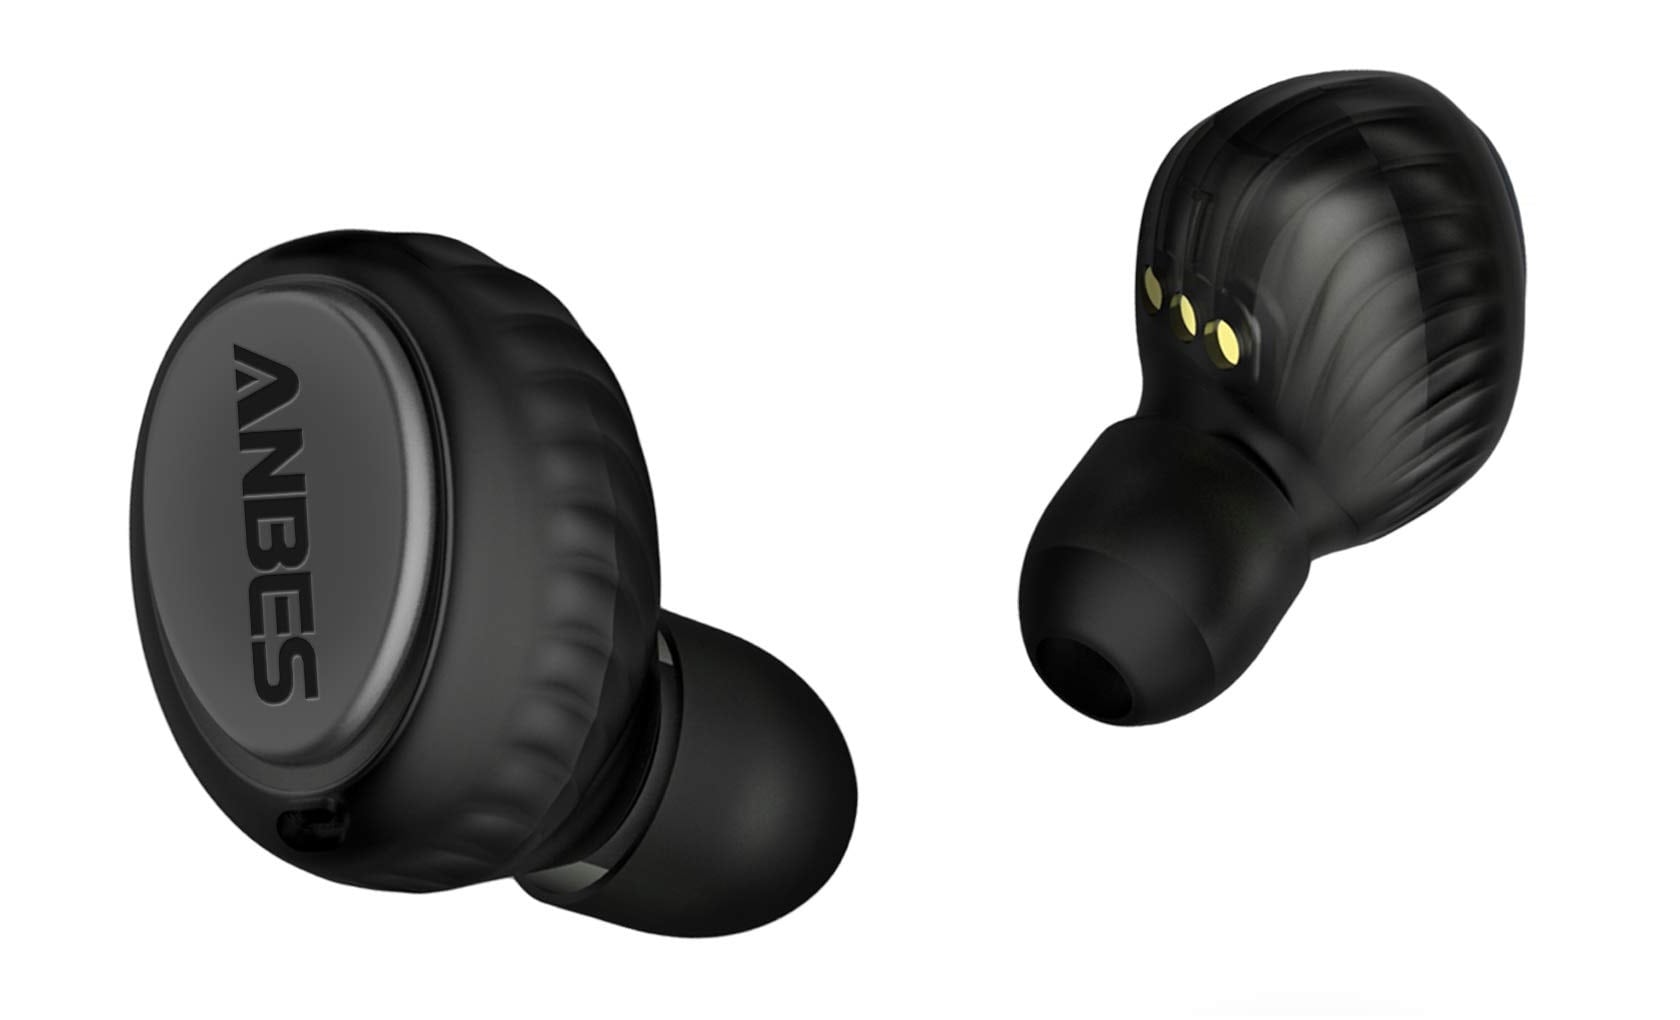 Anbes Wireless Earbuds